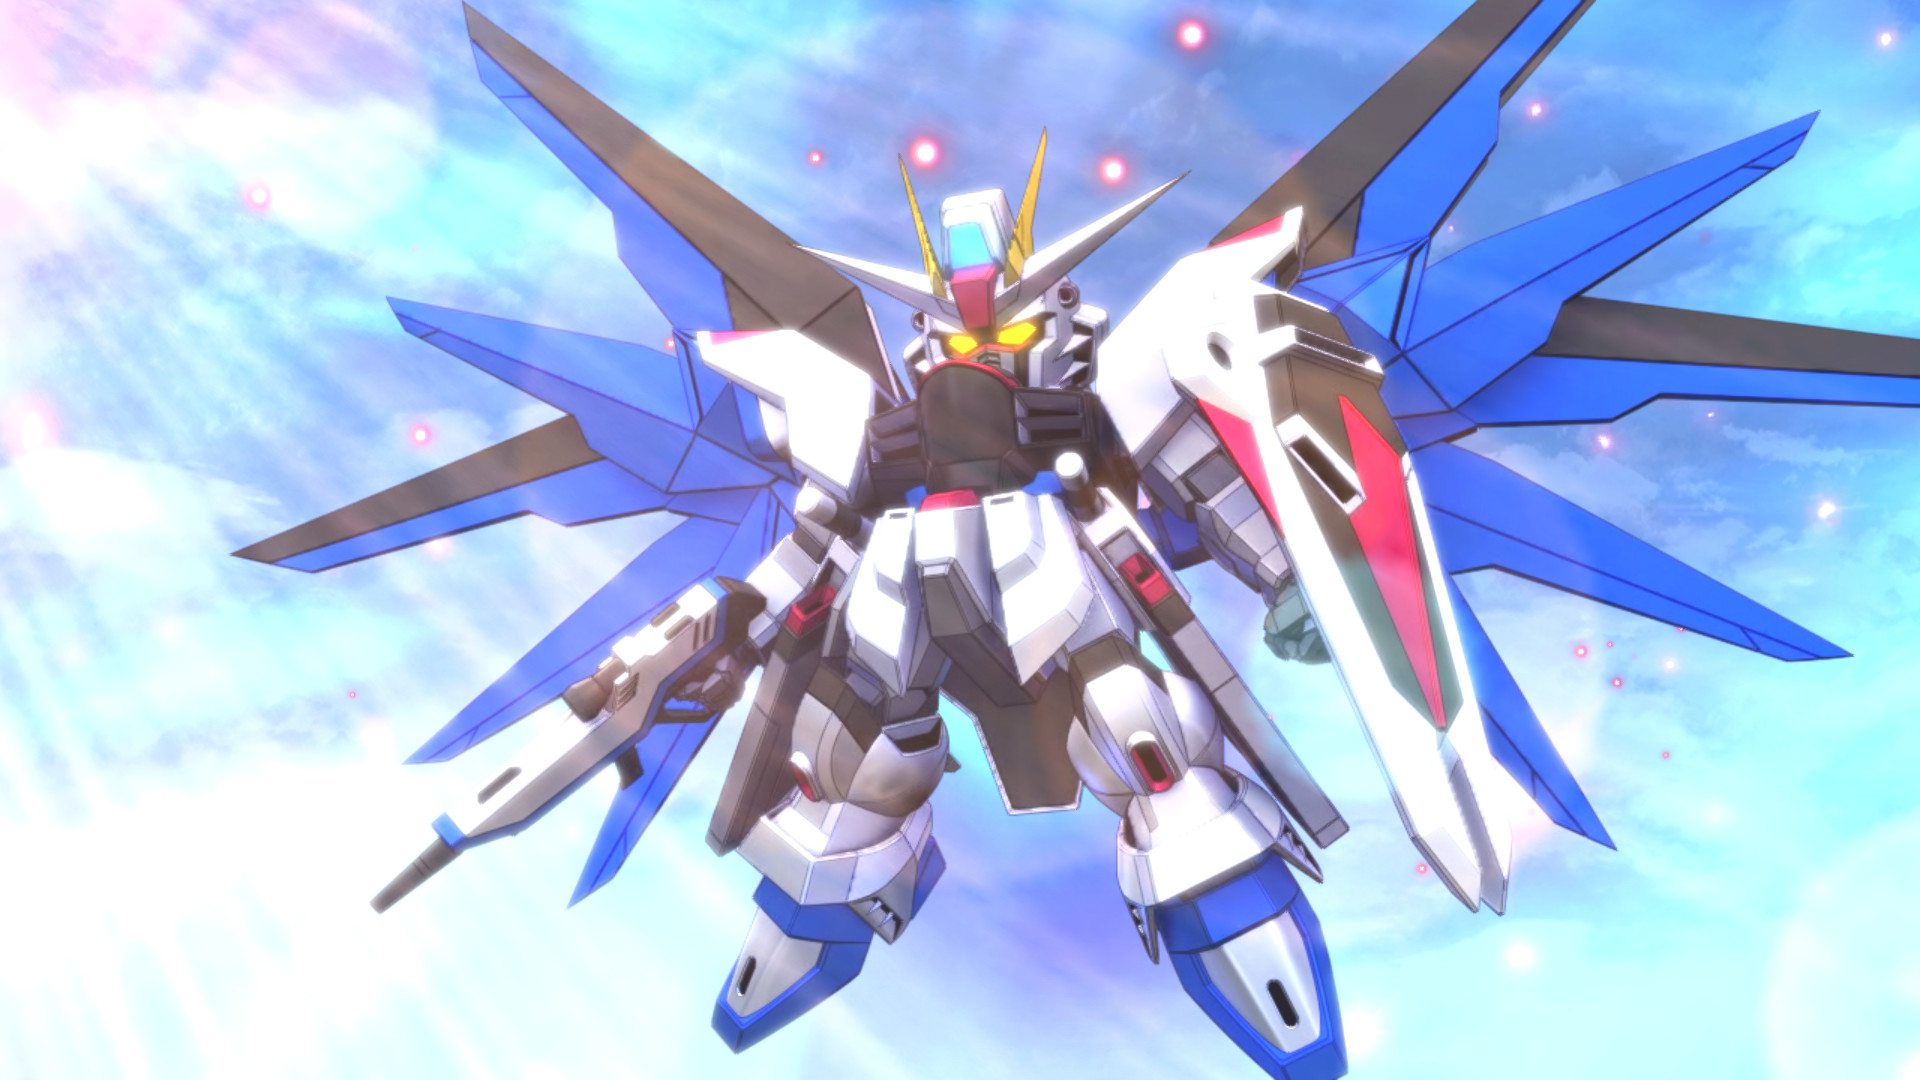 SD GUNDAM G GENERATION CROSS RAYS Build 0201118 PC Free Download images